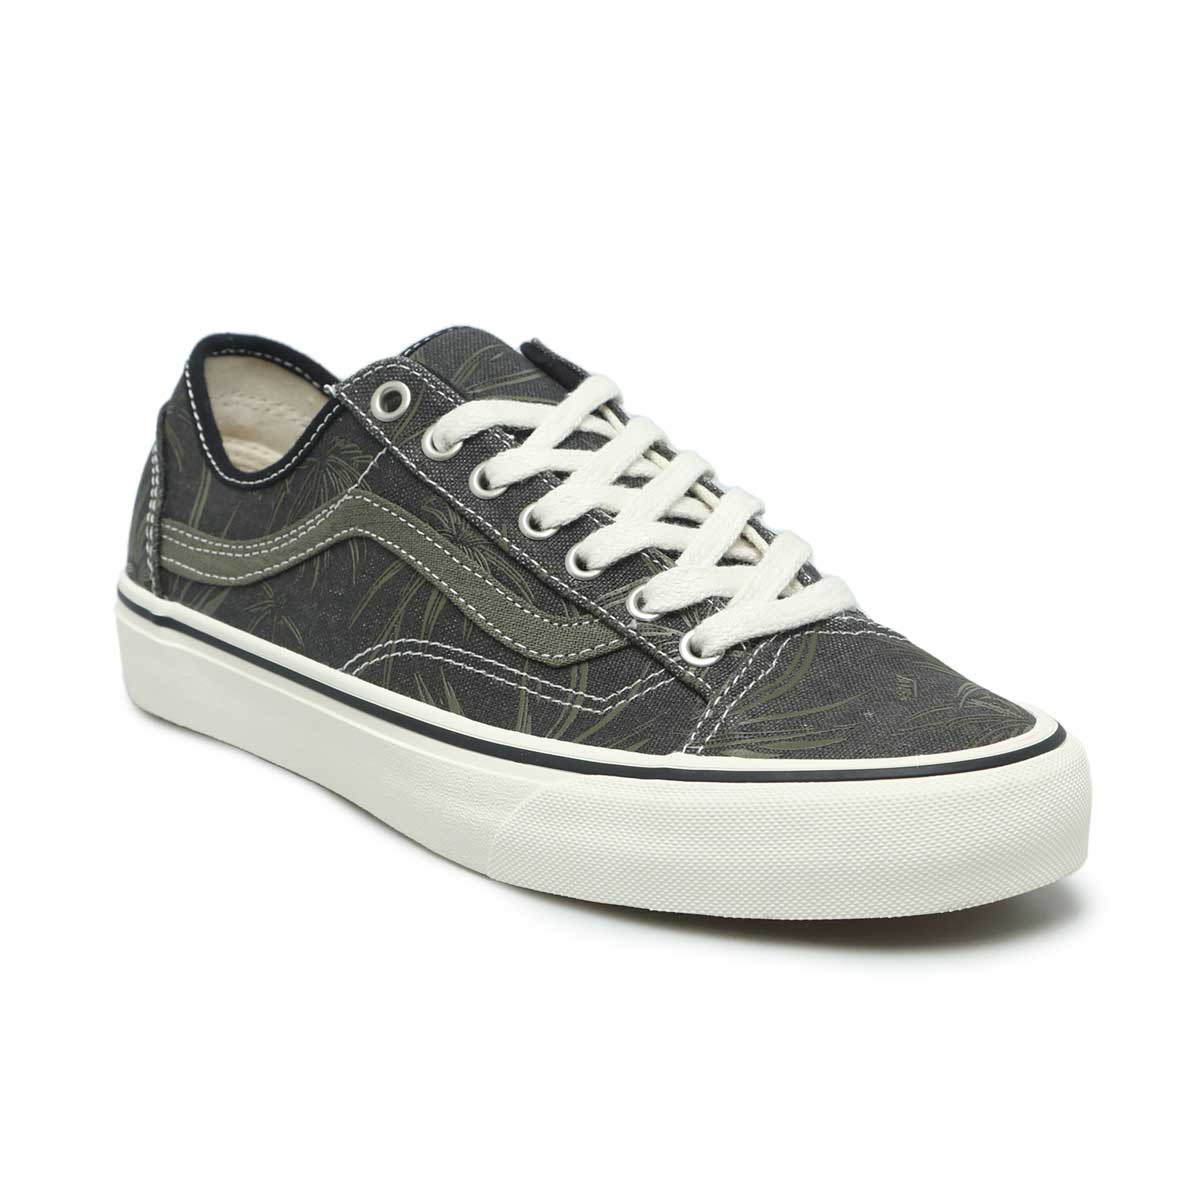 Jual Vans Style 36 Decon SF - (Eco Theory) Black Palm/Marshmallow